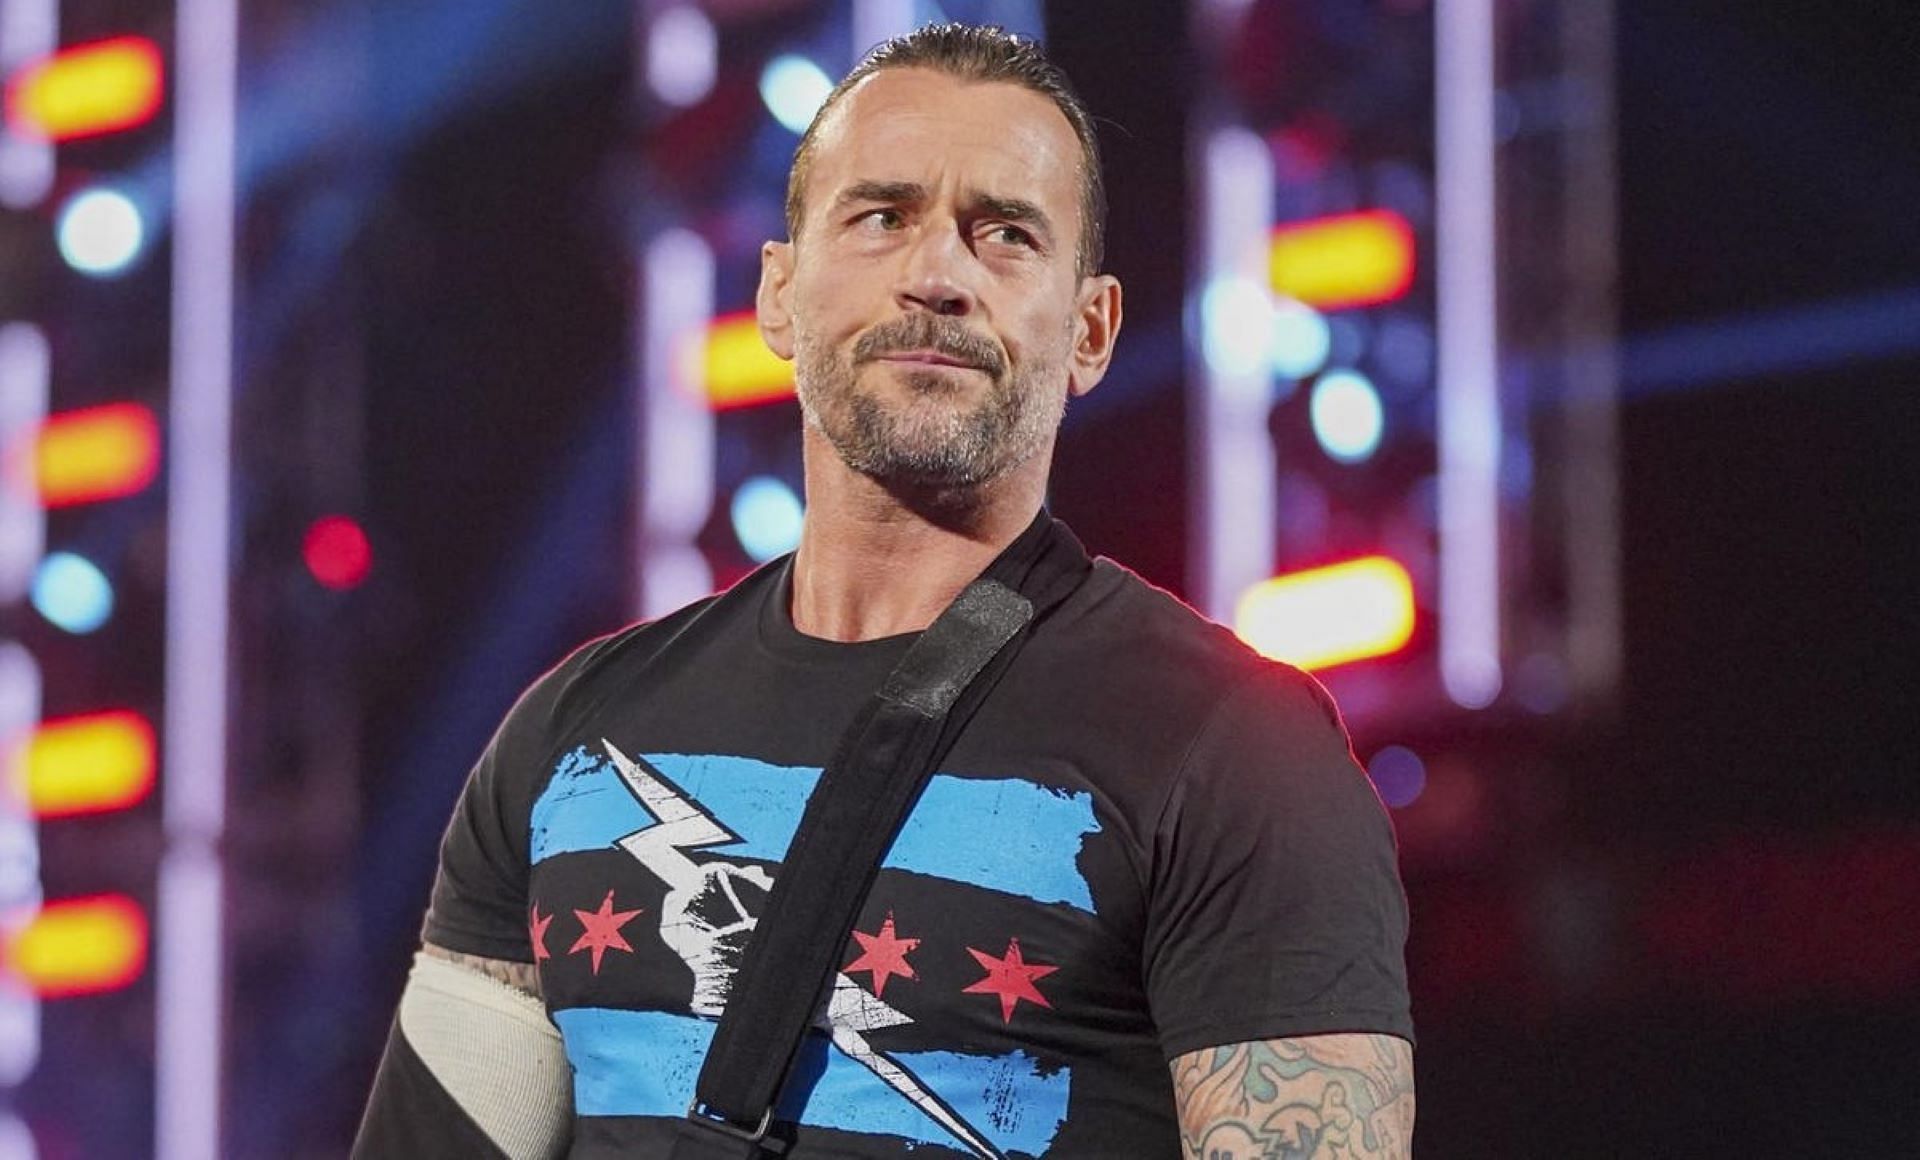 CM Punk will have to wait for his WrestleMania main event.